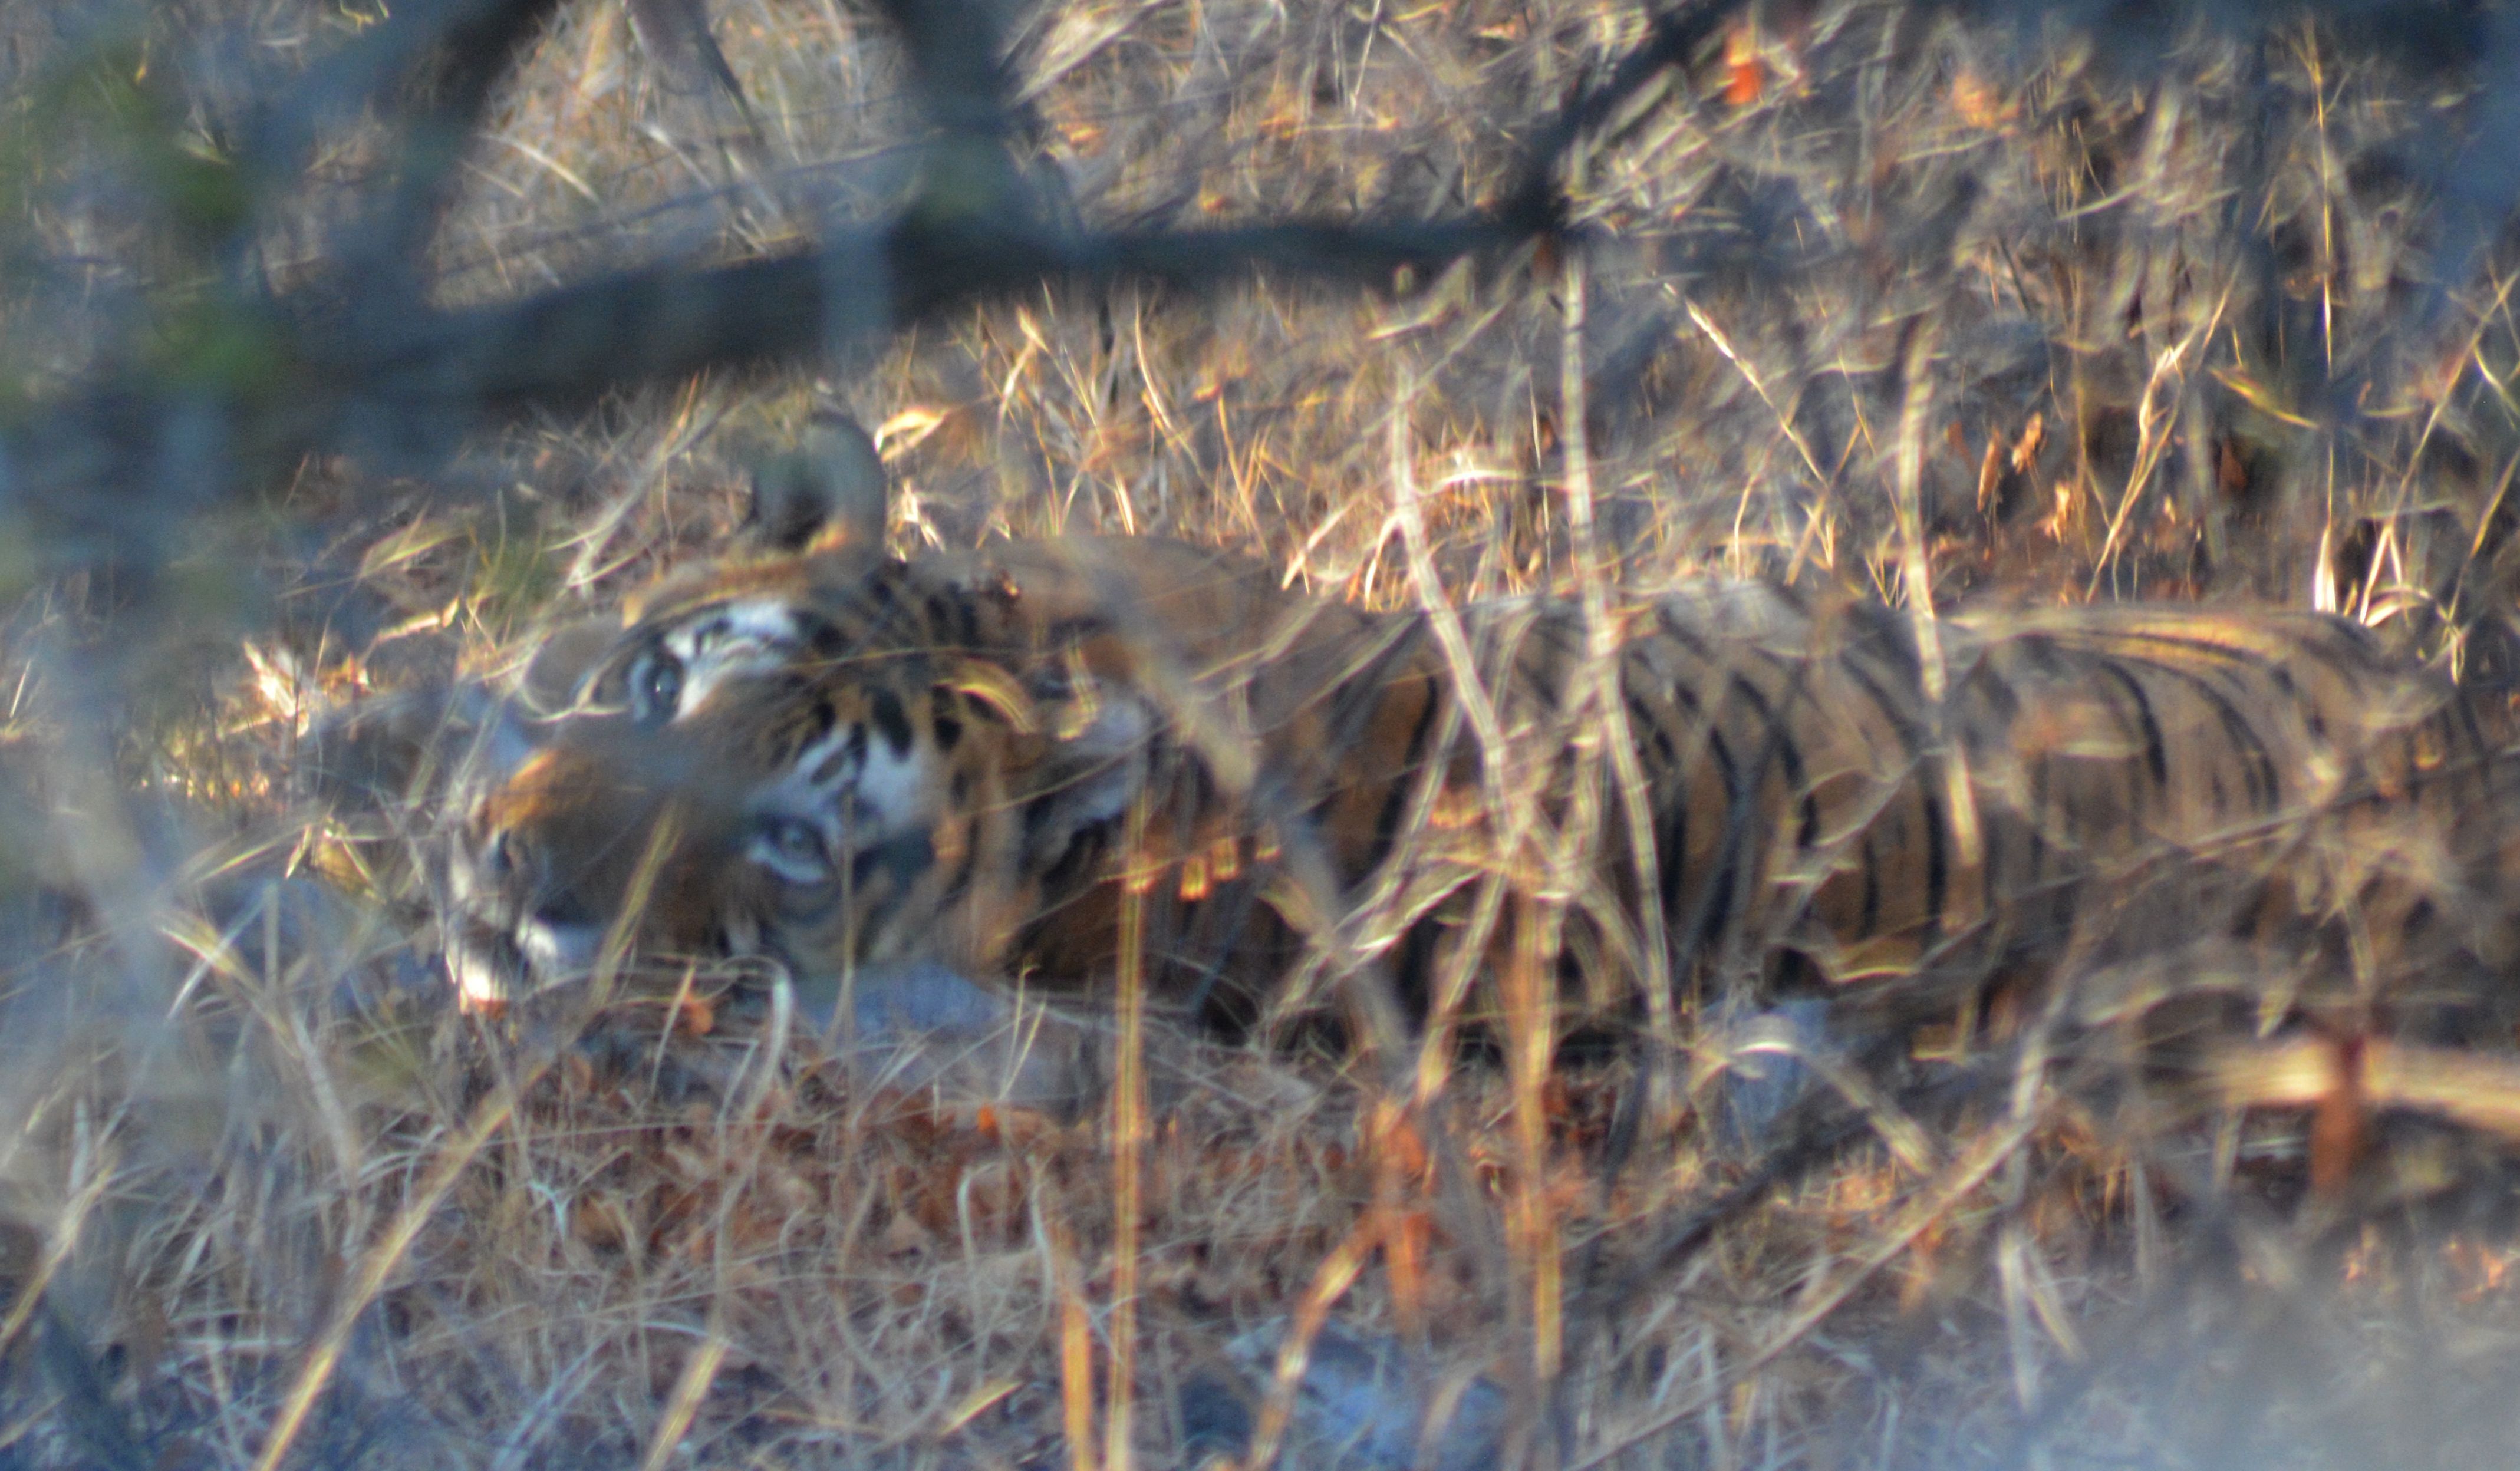 Know how tiger is missing in Sariska